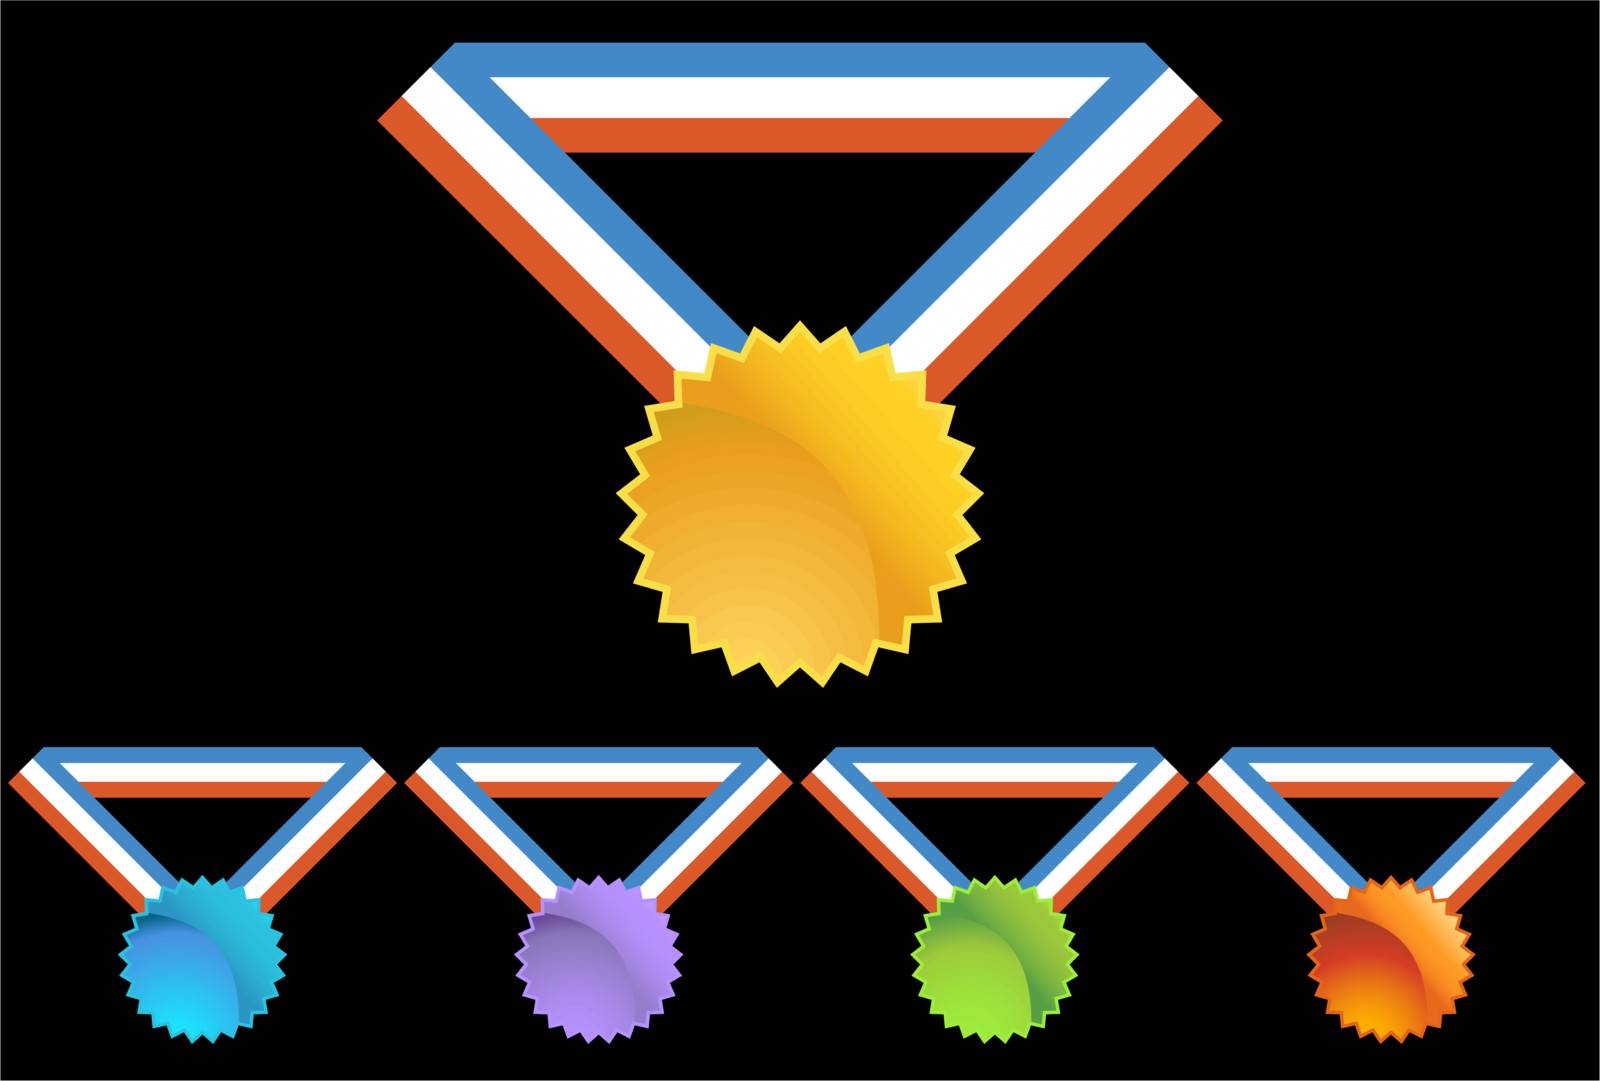 Set of 5 award medals with ribbon on black background.